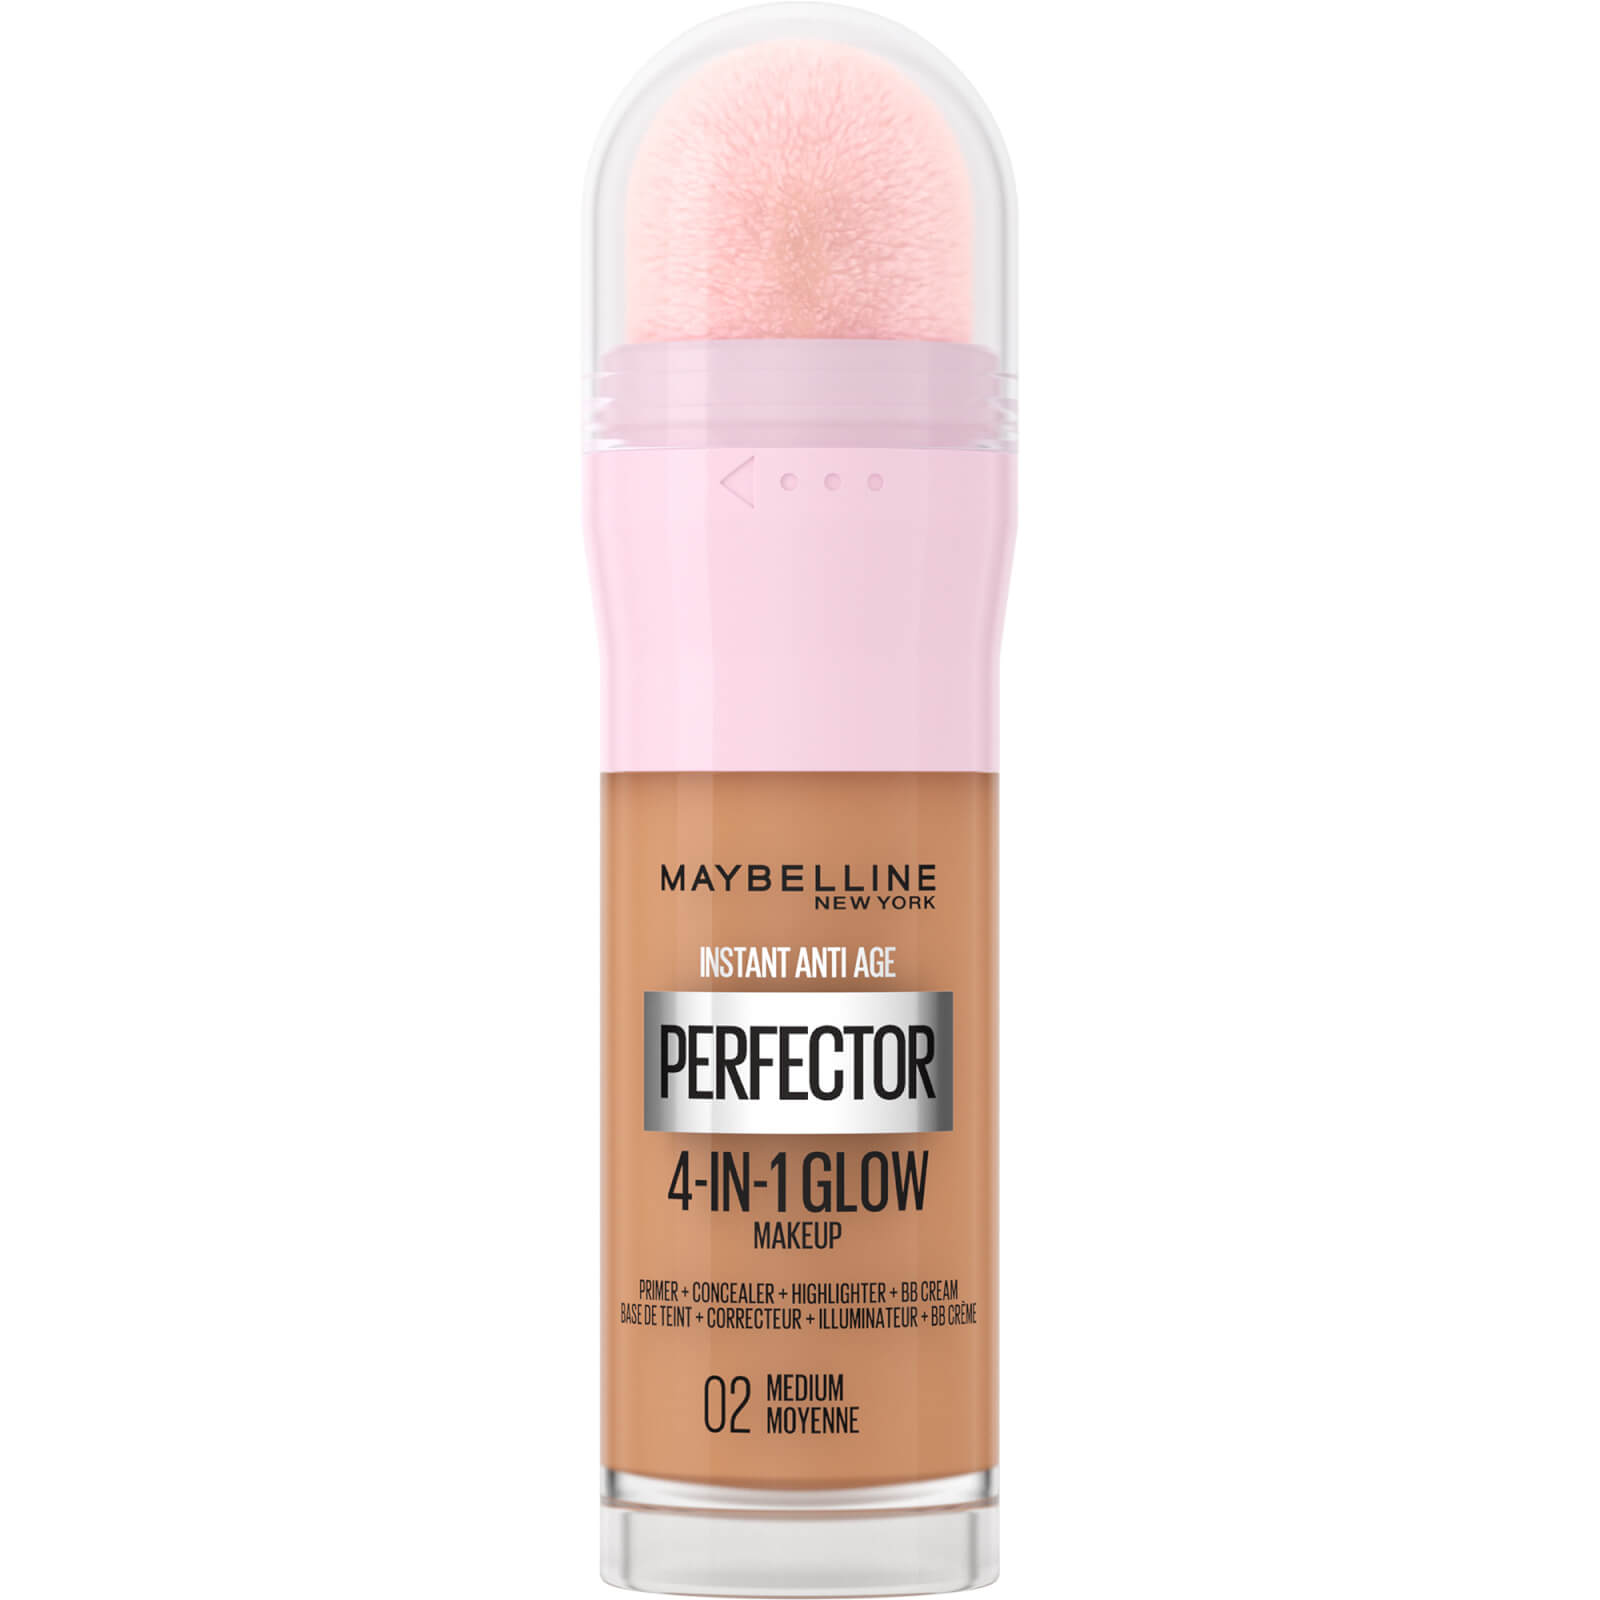 Image of Maybelline Instant Anti Age Perfector 4-in-1 Glow Primer, Concealer, Highlighter, BB Cream 20ml (Various Shades) - Medium